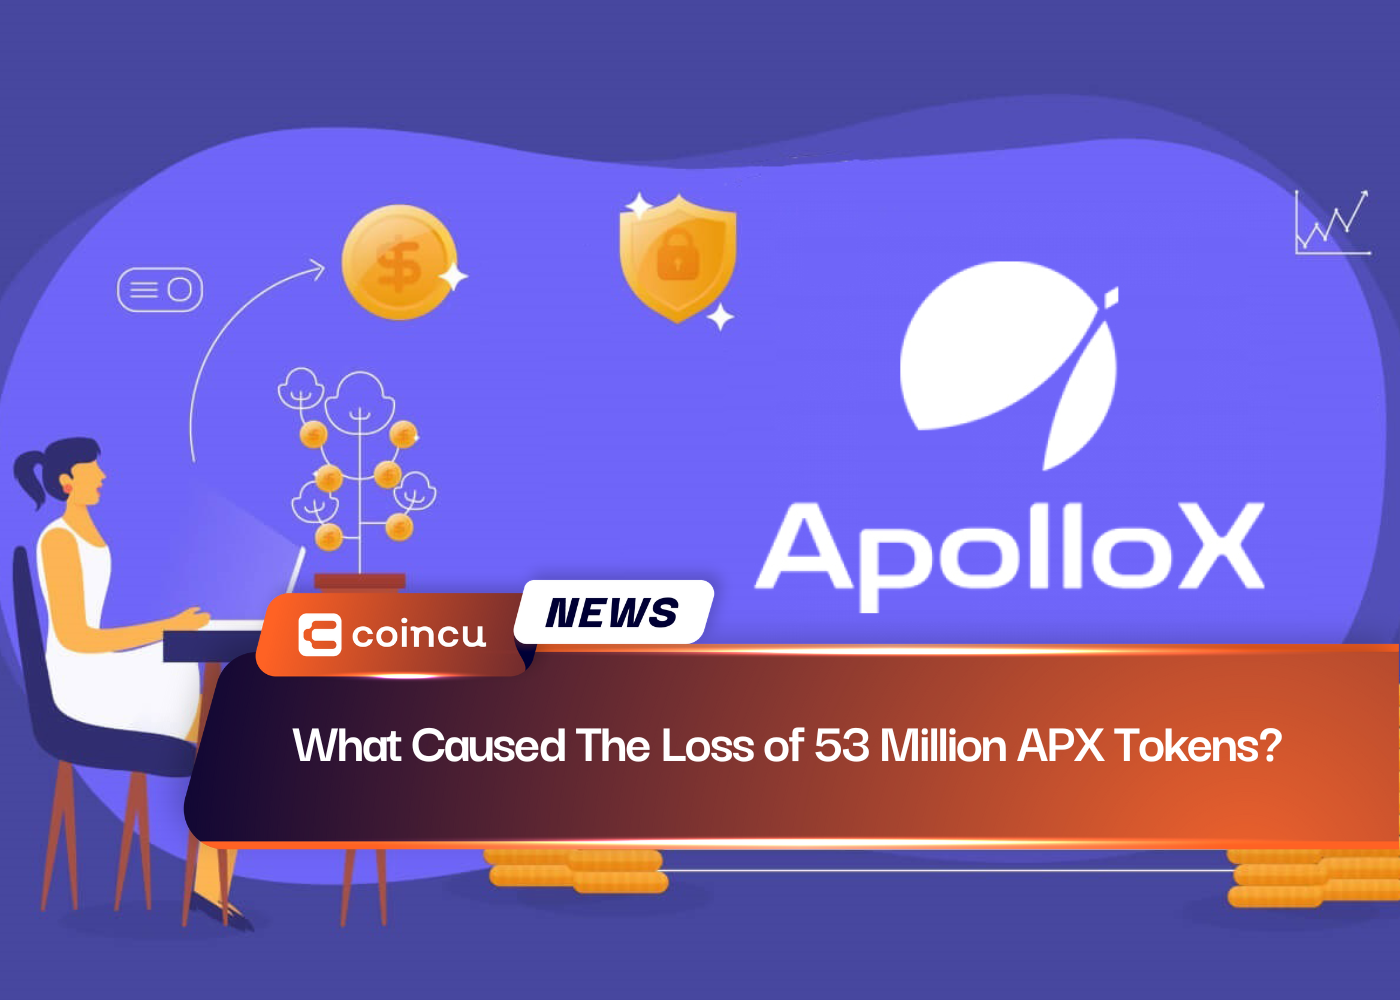 What Caused The Loss of 53 Million APX Tokens?